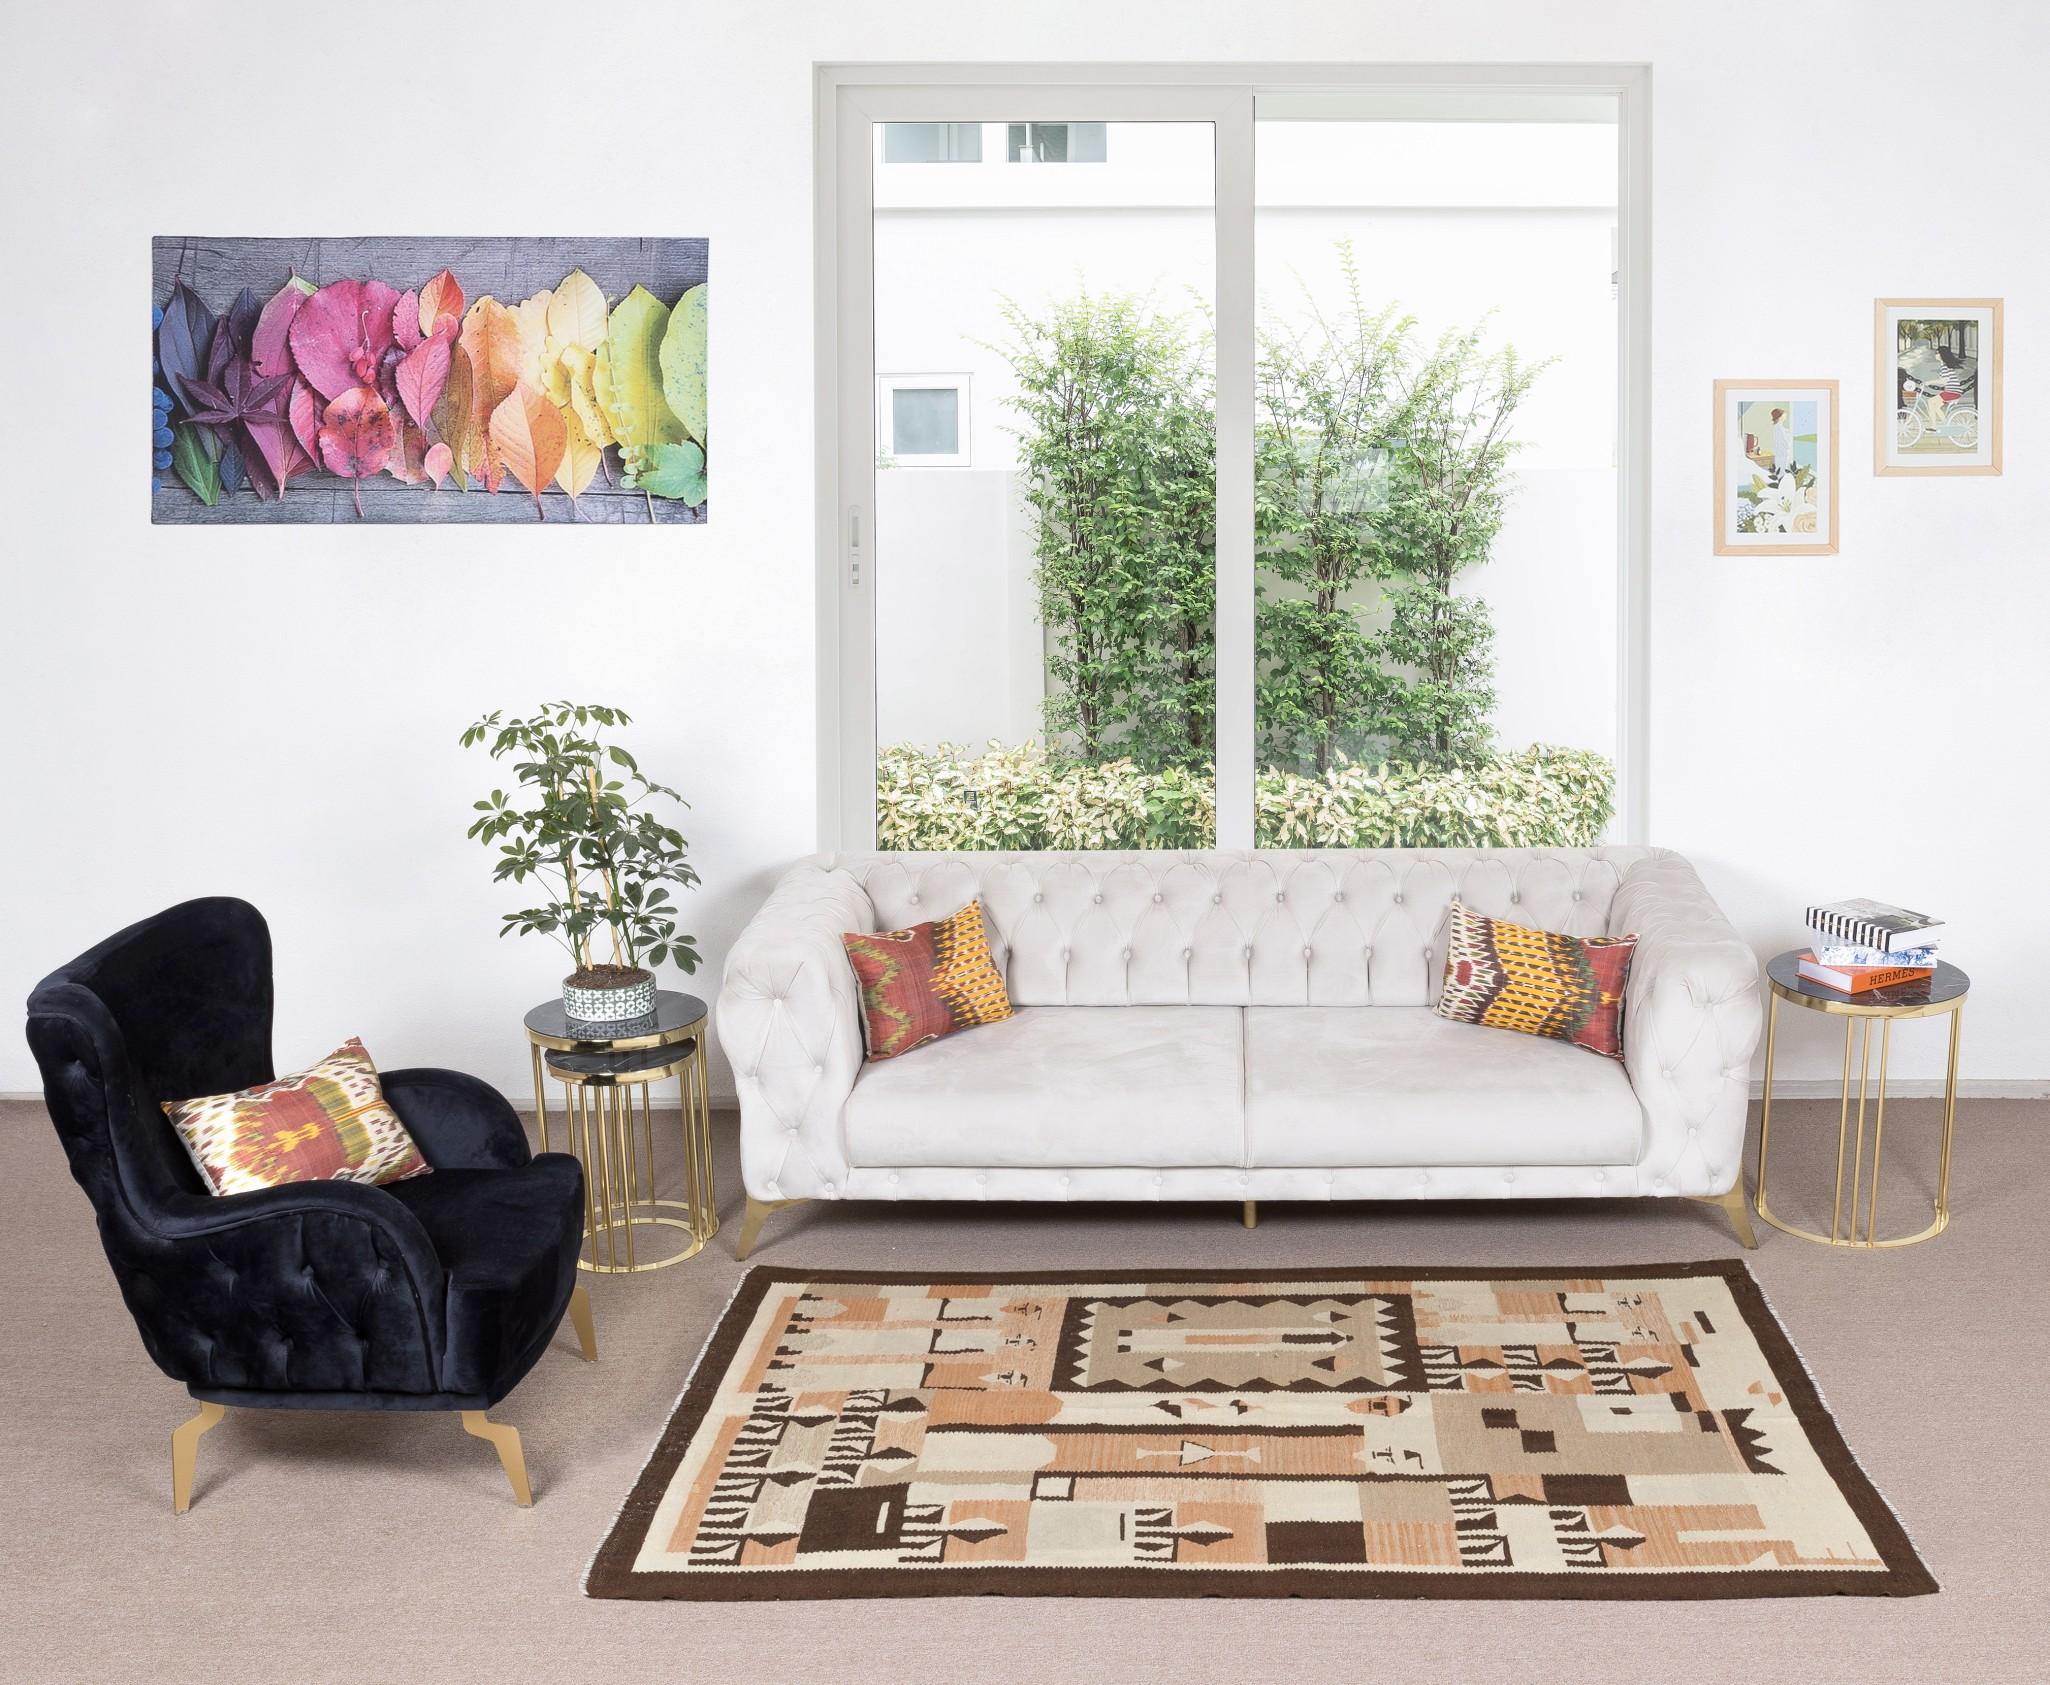 This authentic hand-woven rug made of 100% organic wool. Good condition and cleaned professionally.
Ideal for both residential and commercial interiors.
We can supply a suitable rug-pad if requested for extra cushioning and protection from wear